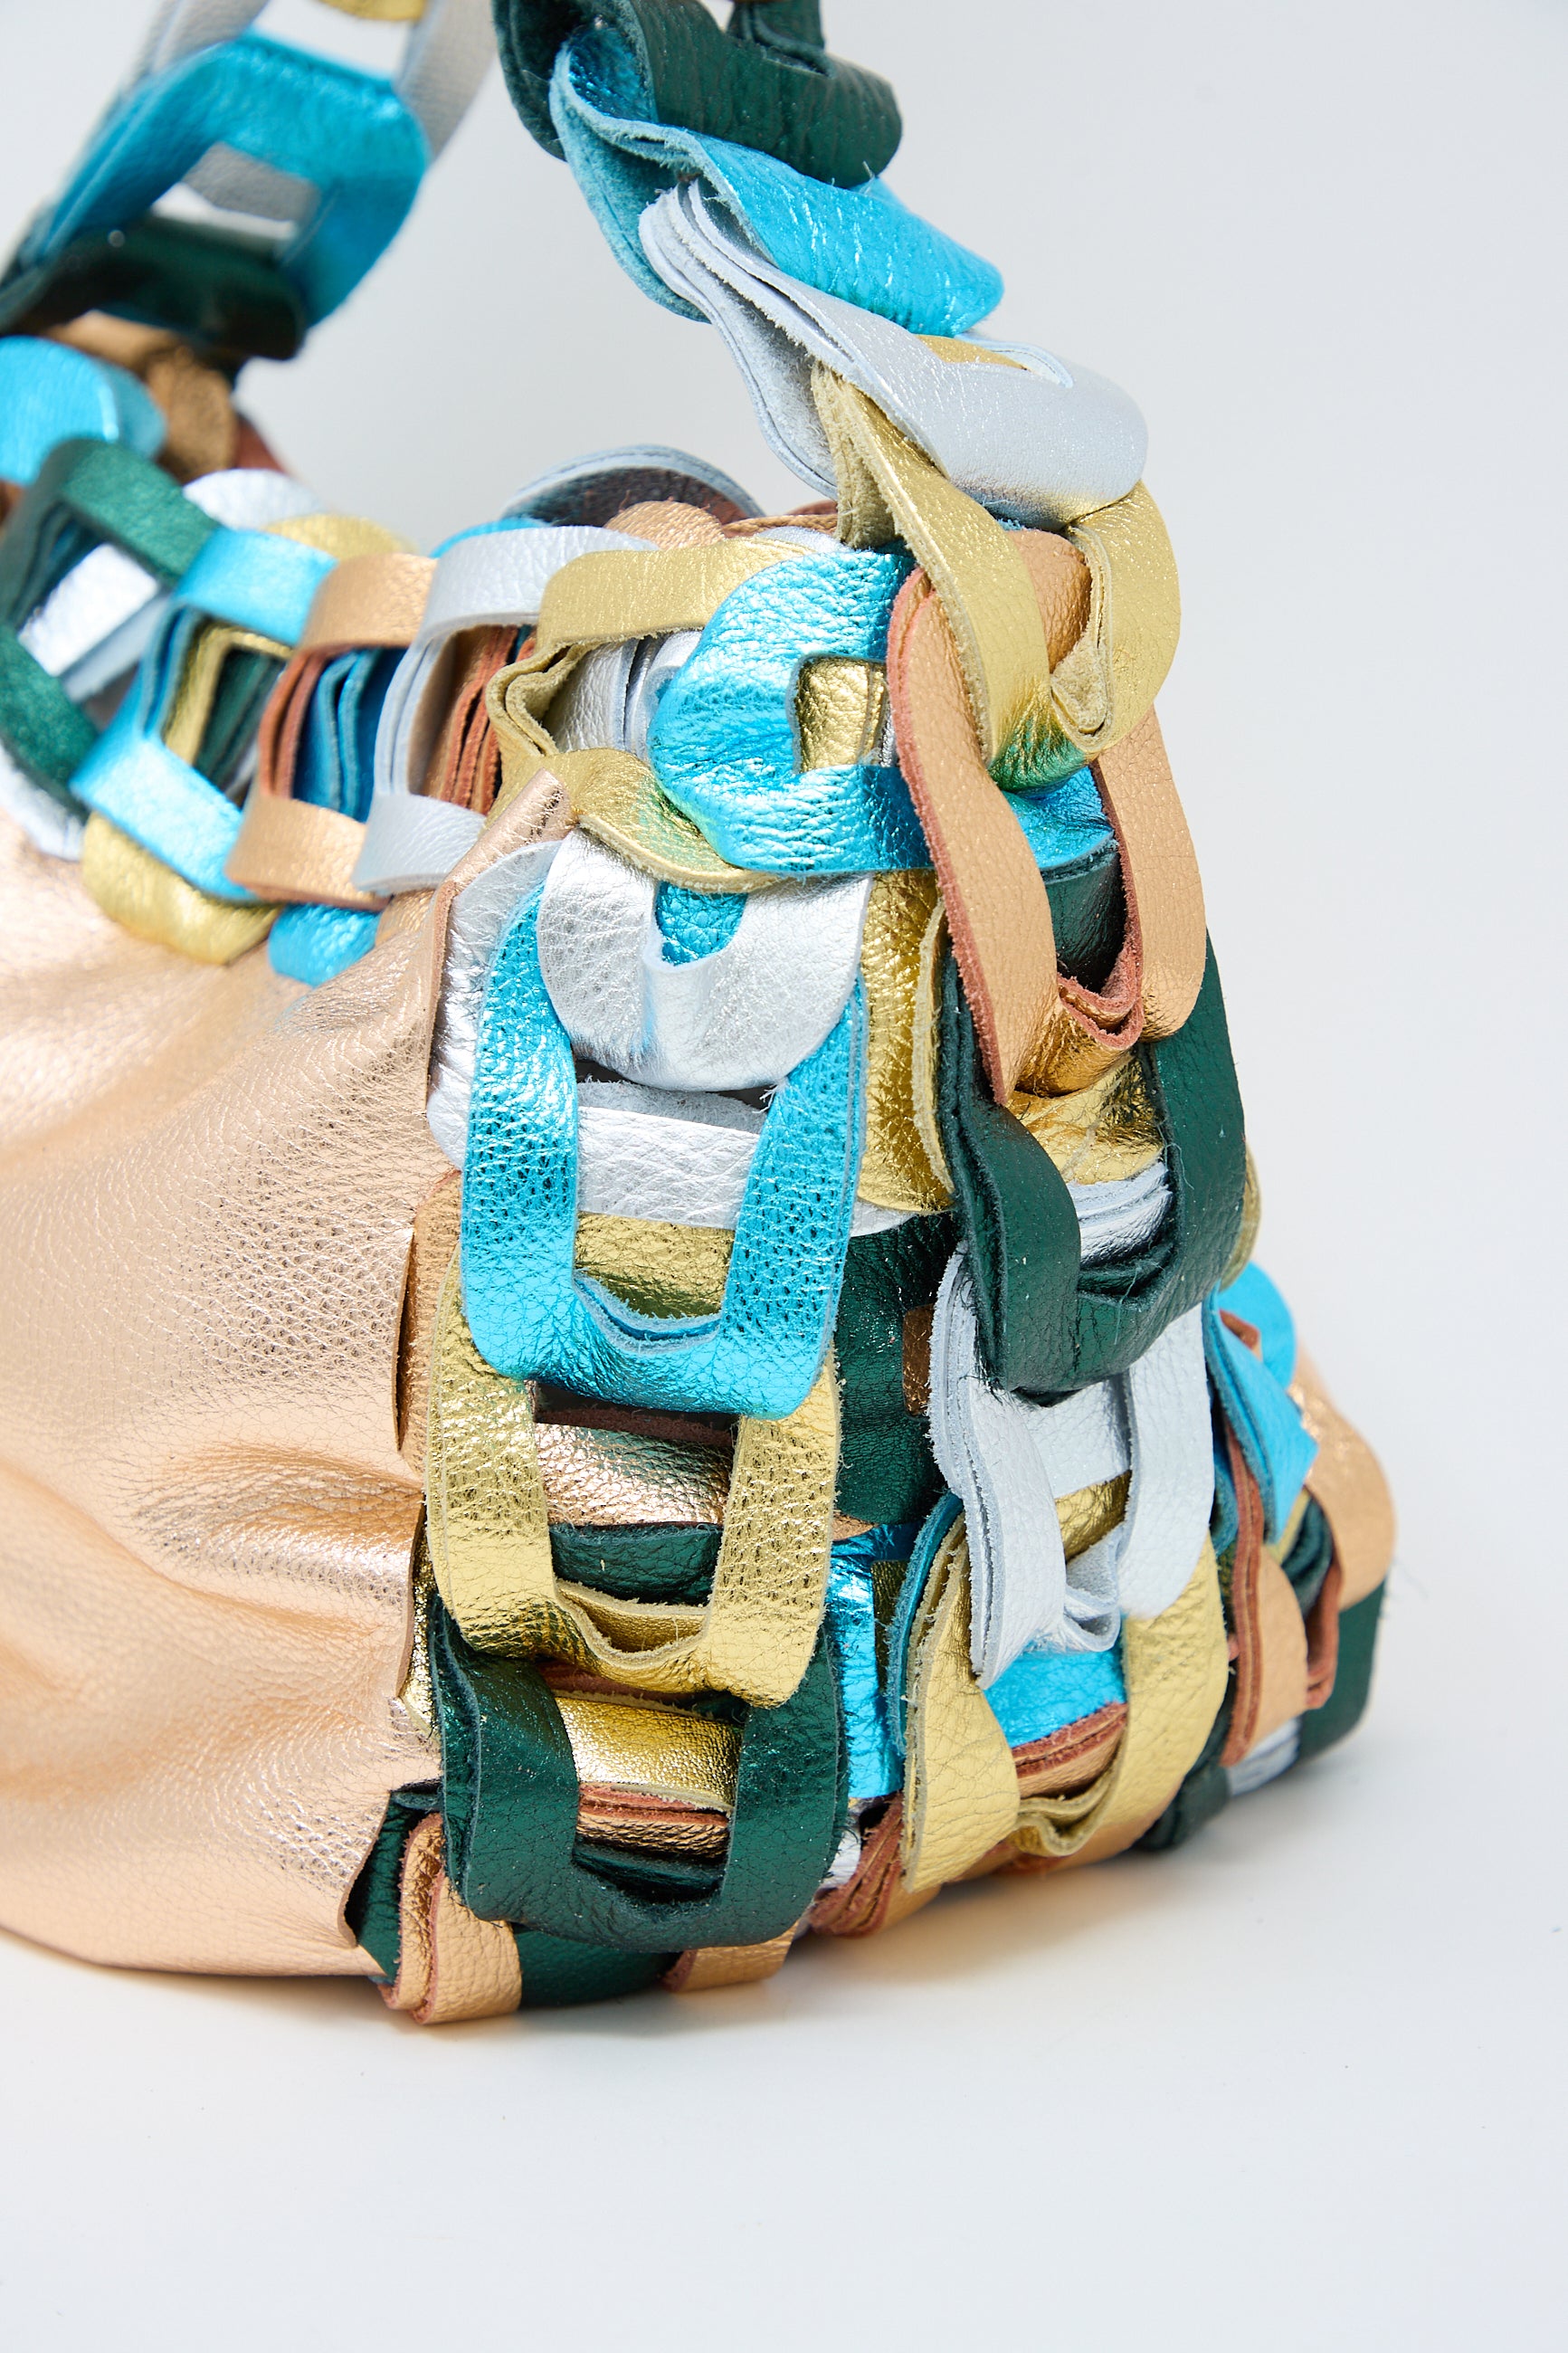 Close-up of a colorful SC103 Leather Drum Bag in Mineral featuring intertwined strips of metallic blue, green, gold, and silver leather with leather links strap.